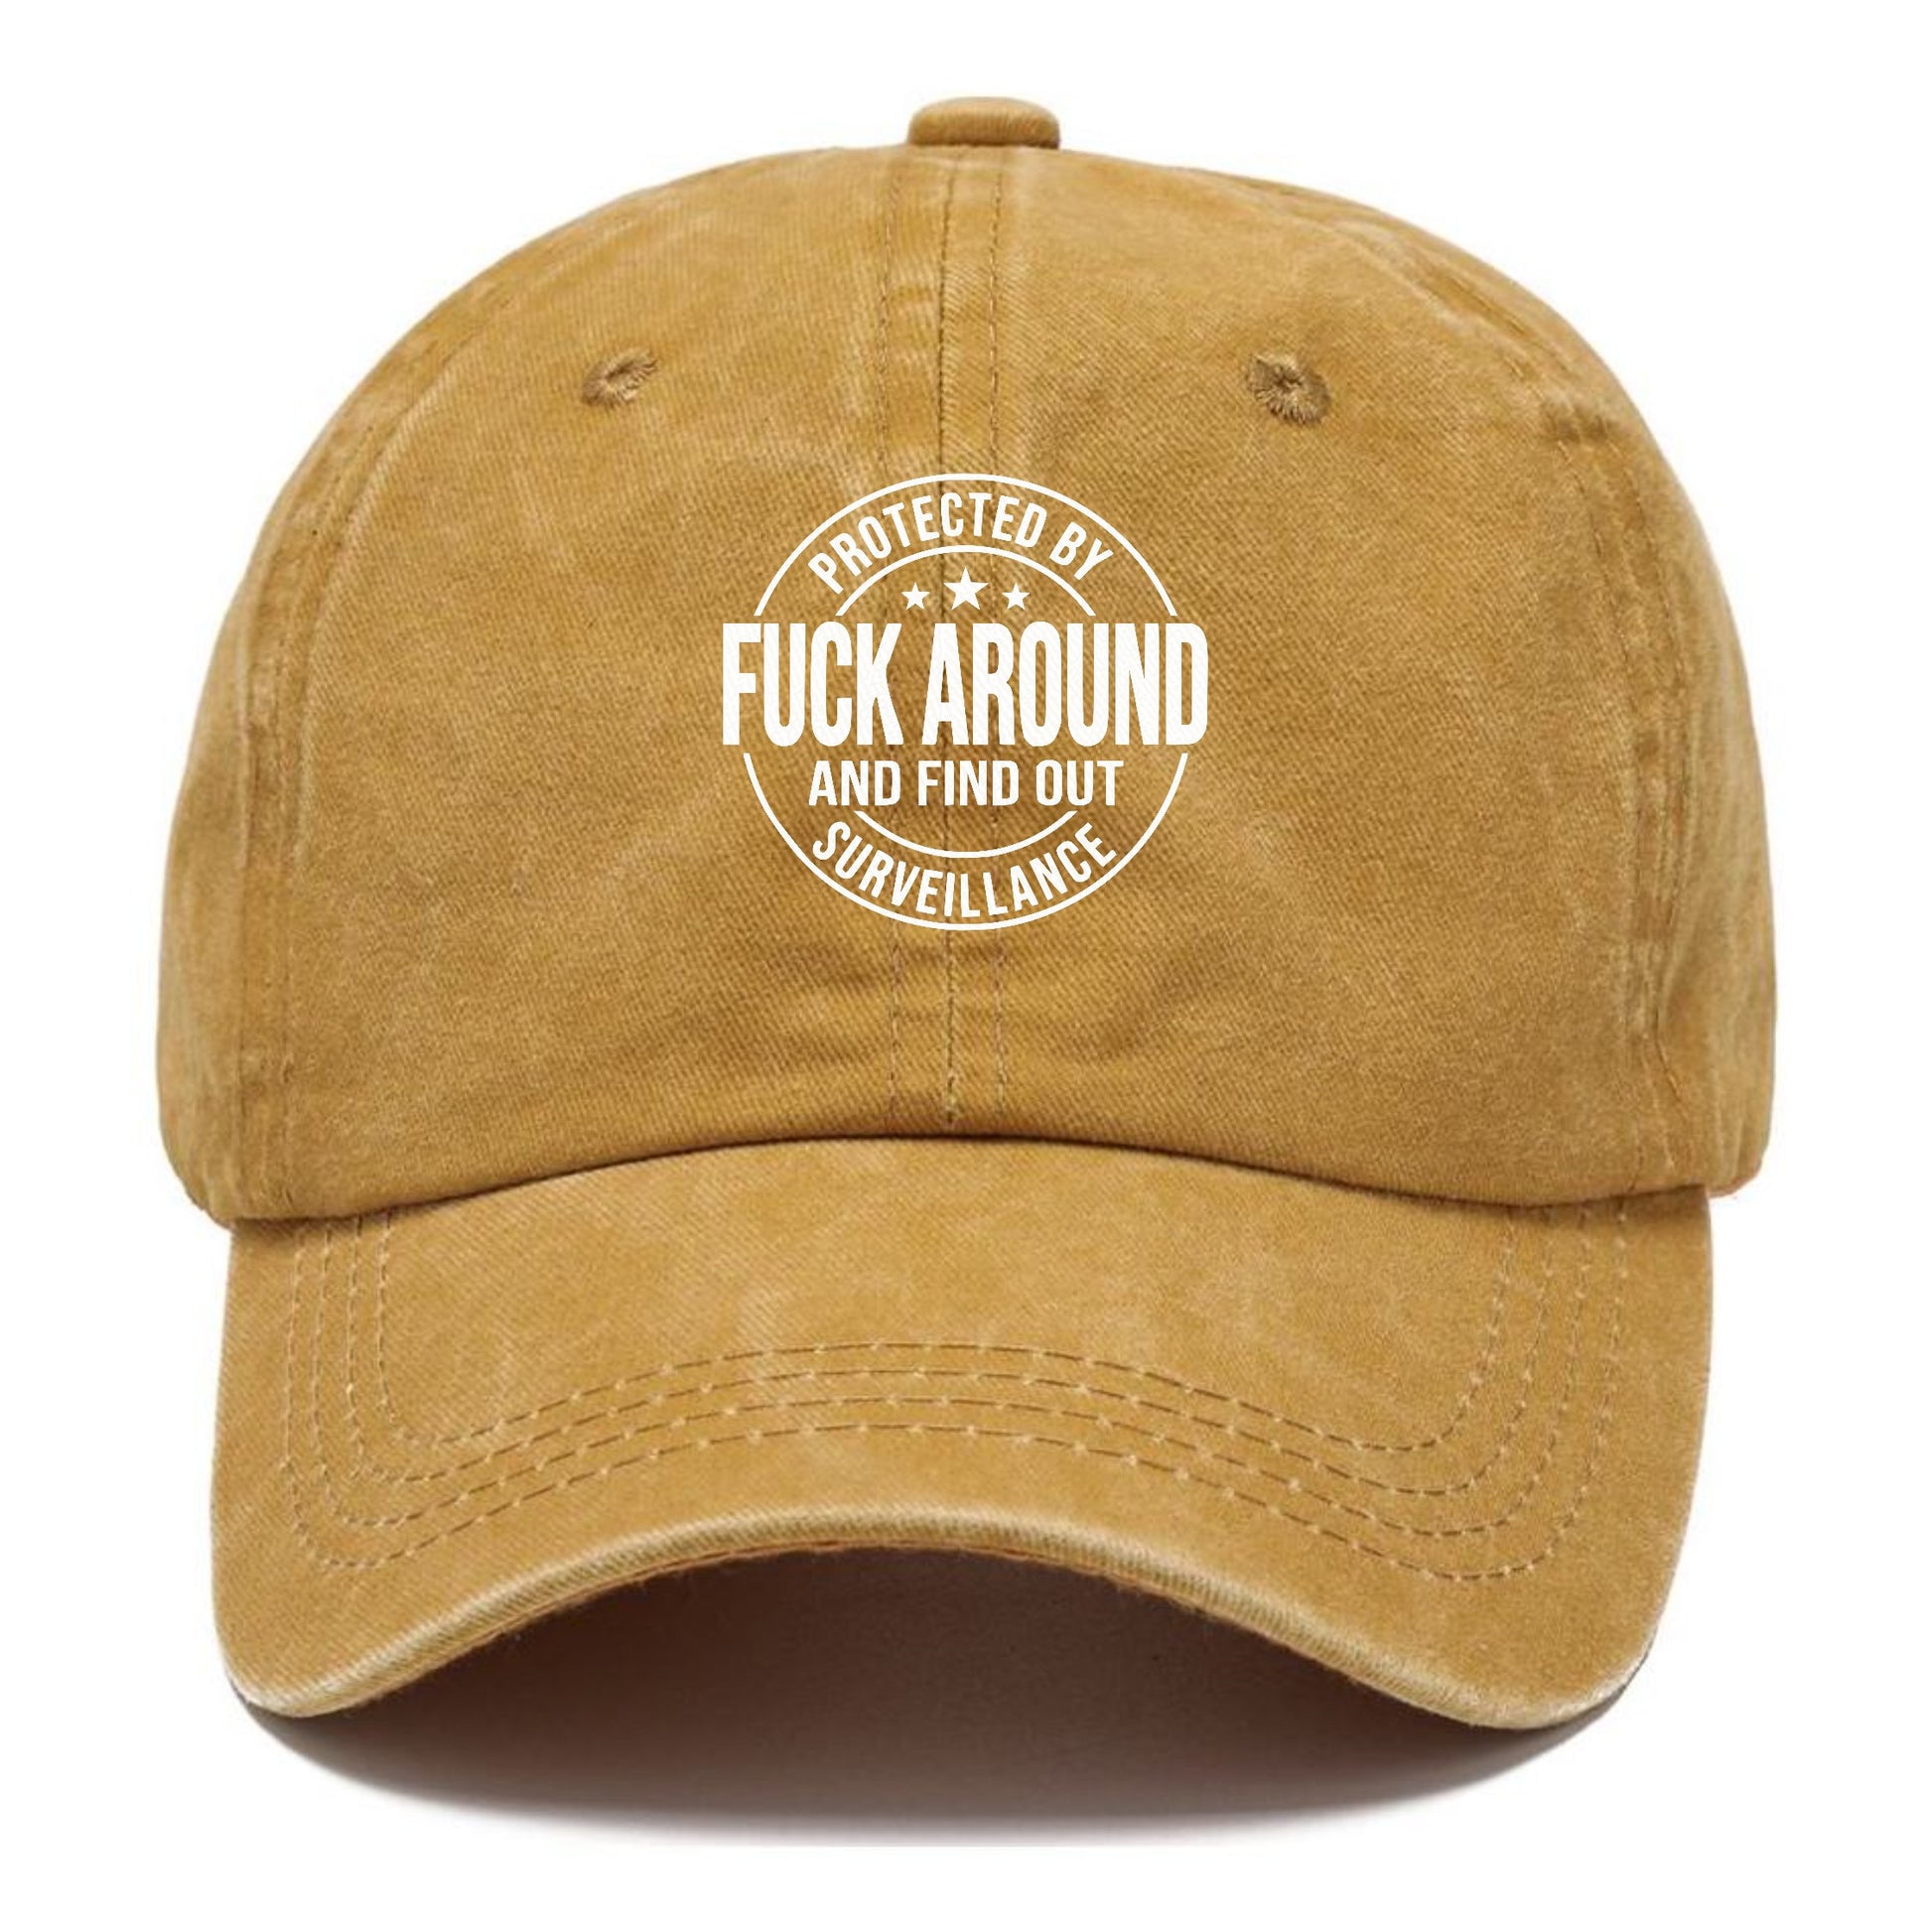 fuck around and find out Hat